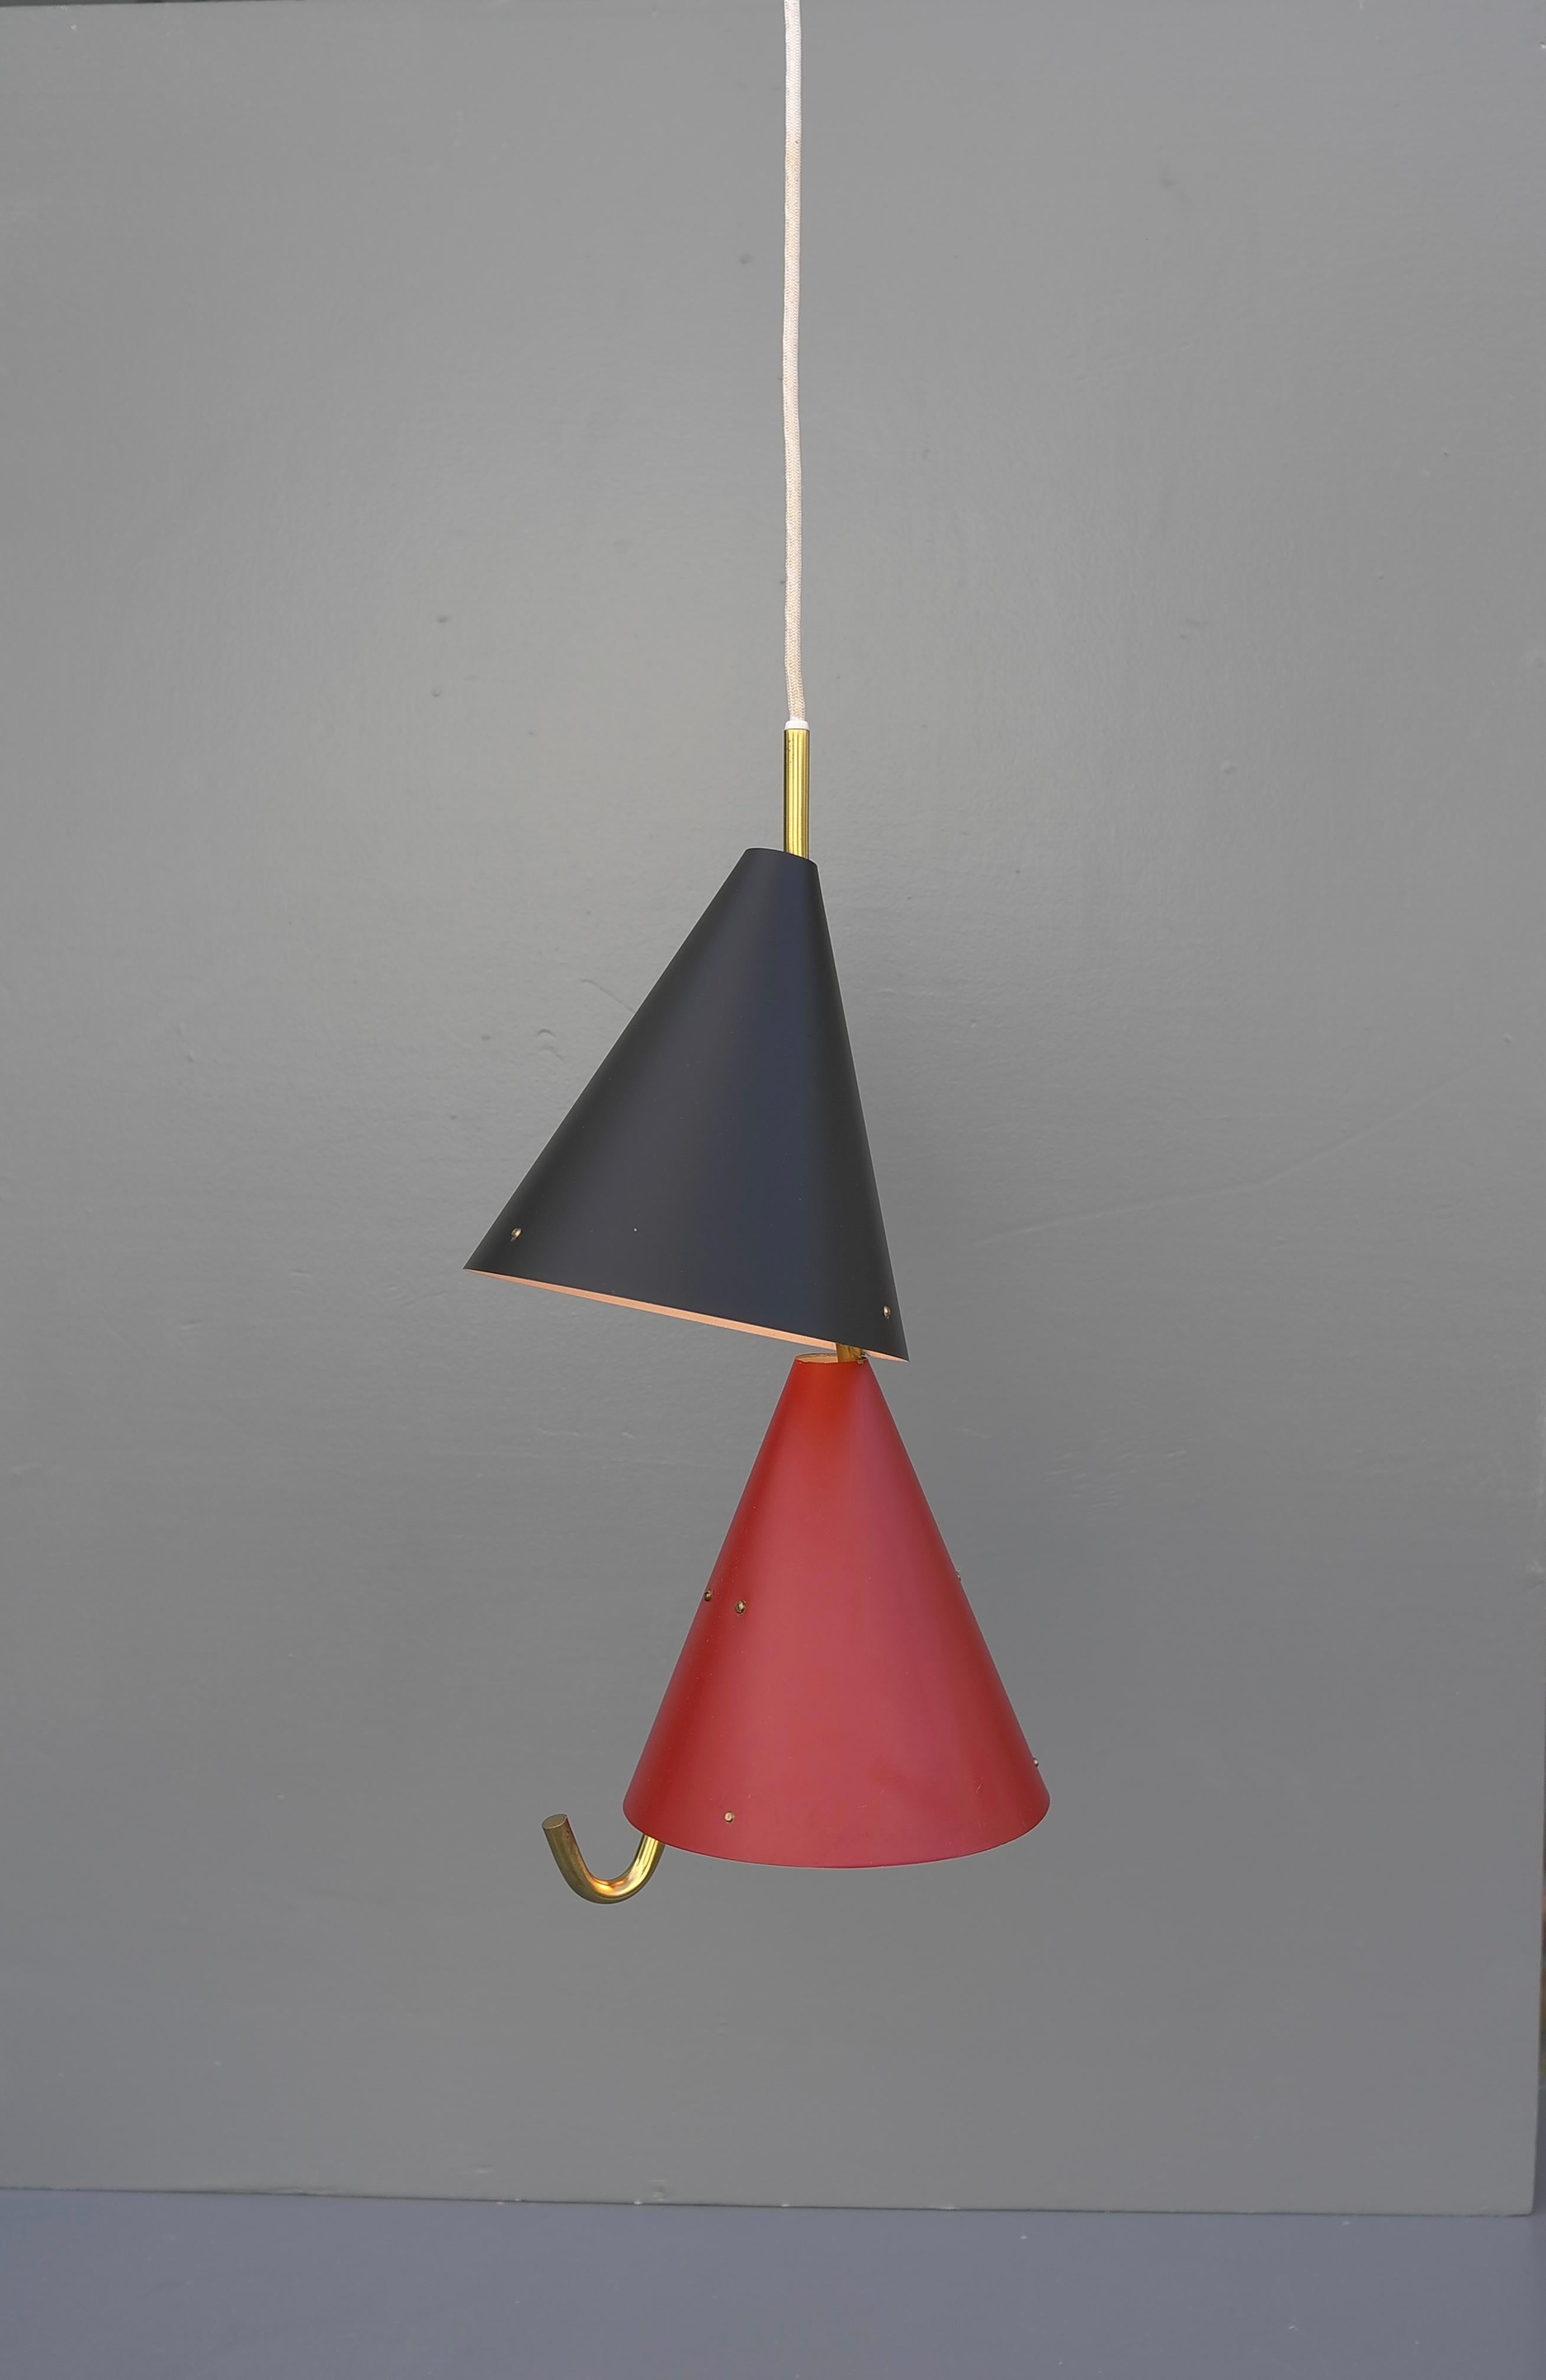 Bent Karlby Red and Black New Old Stock Lyfa Pendant Lamp, Denmark, 1955 For Sale 5